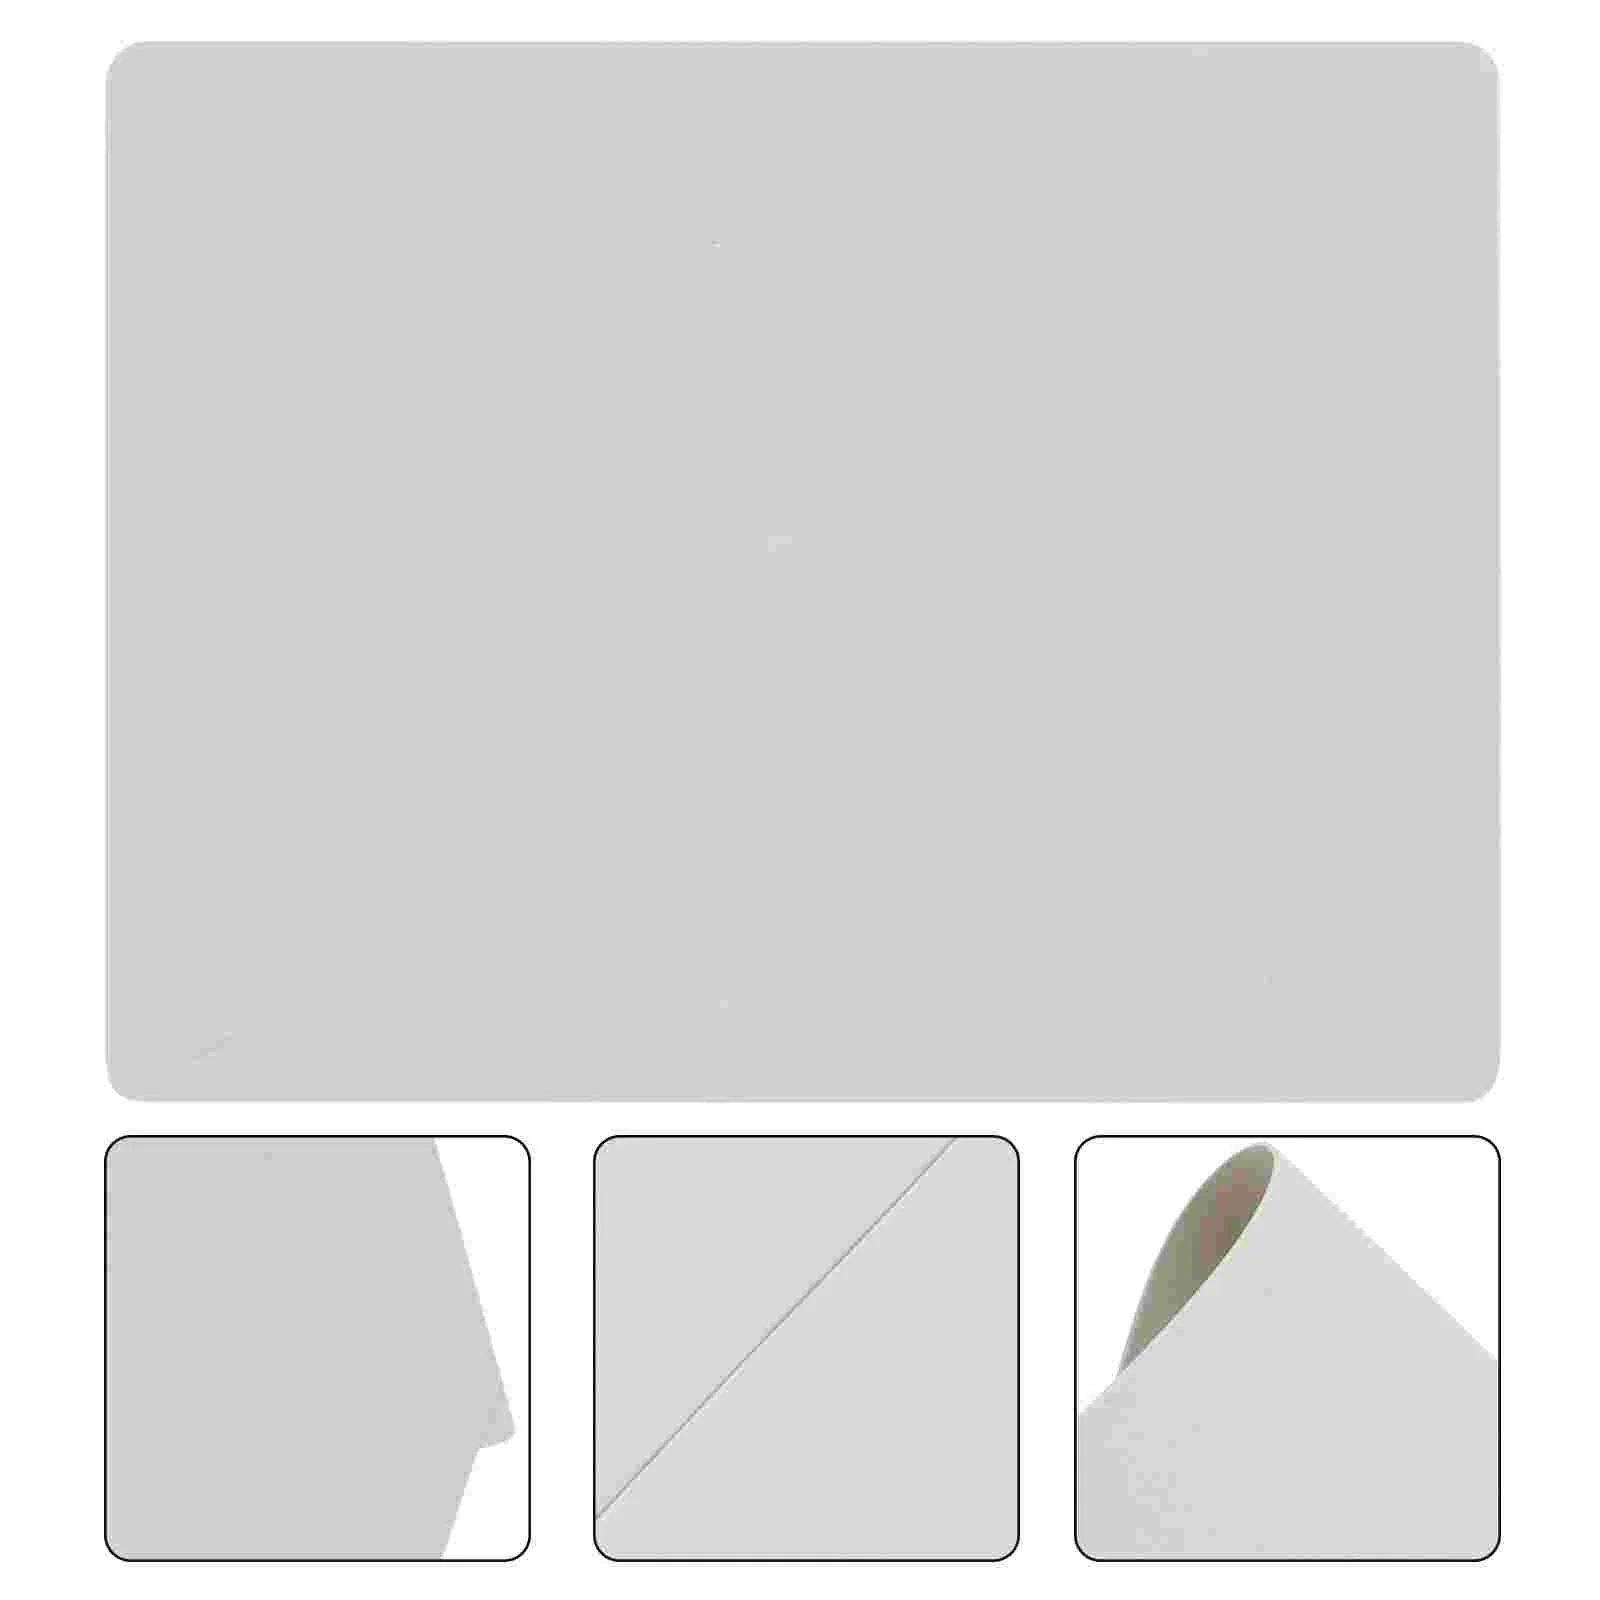 

ULTNICE 10Pcs Blank Skin Practice Double Sides Practice Skins for Beginners and Experienced Artists Supplies